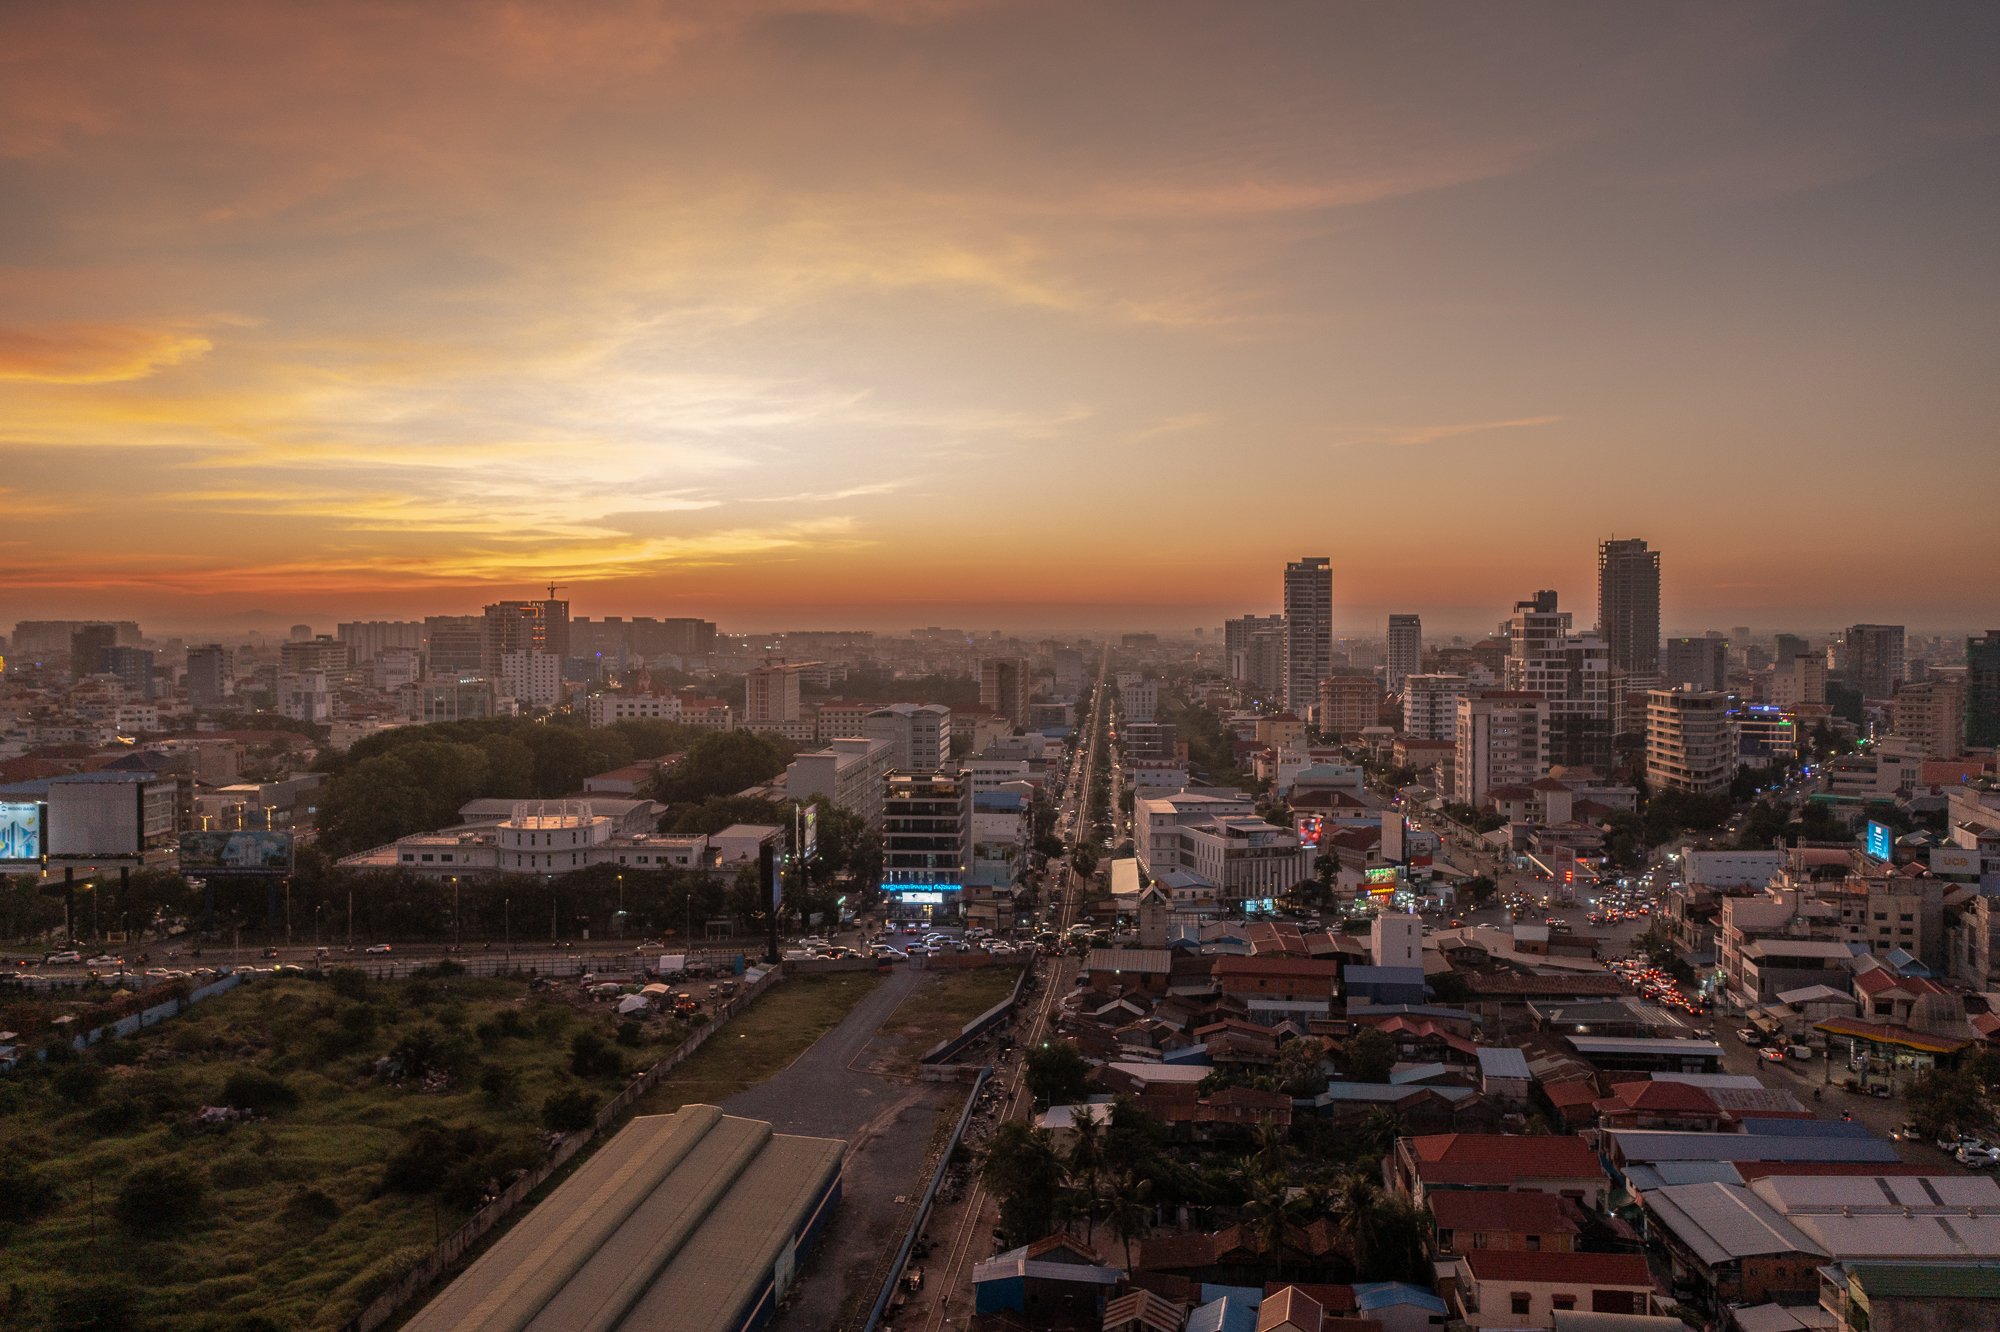 A drone photograph over Phnom Penh, looking to the west as the sunsets over the railway tracks.